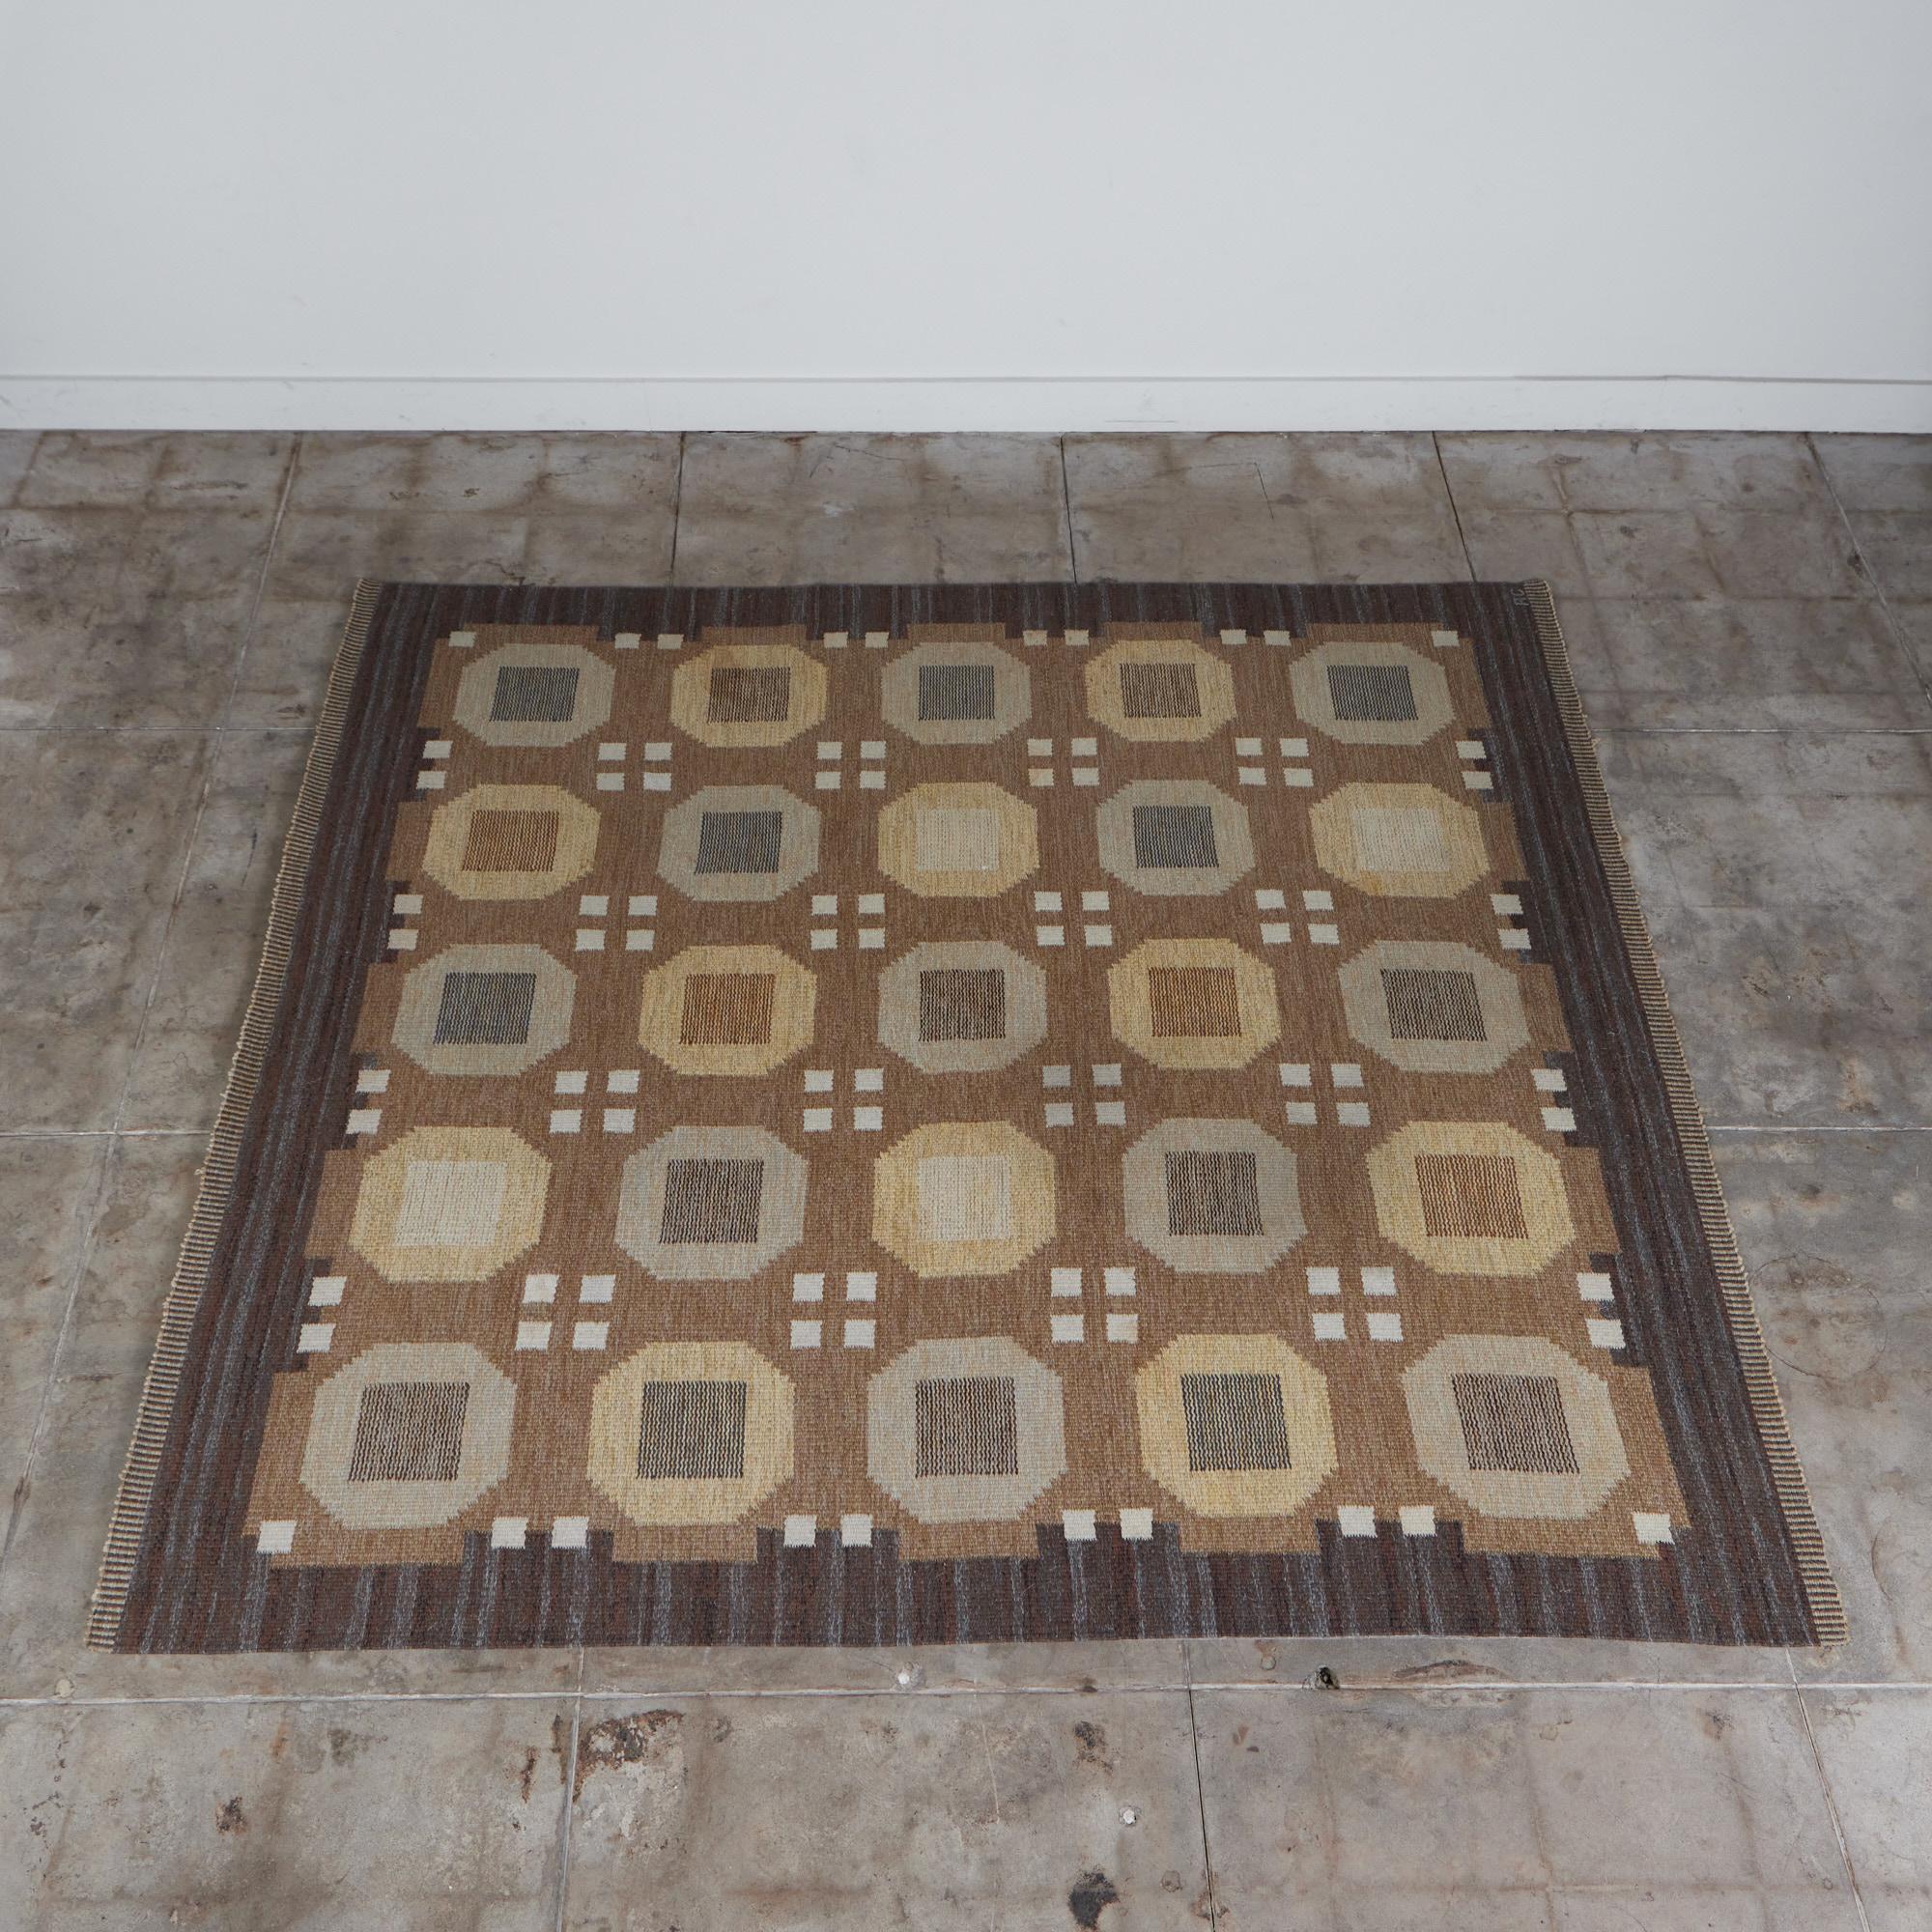 Scandinavian rug by Rakel Callander, c.1950s, Sweden. Like many Swedish kilim rugs, this piece consists of angular shapes and muted colors. With a combination of warm and cool earth-tones, the flatweave rug features a geometric pattern of octagons